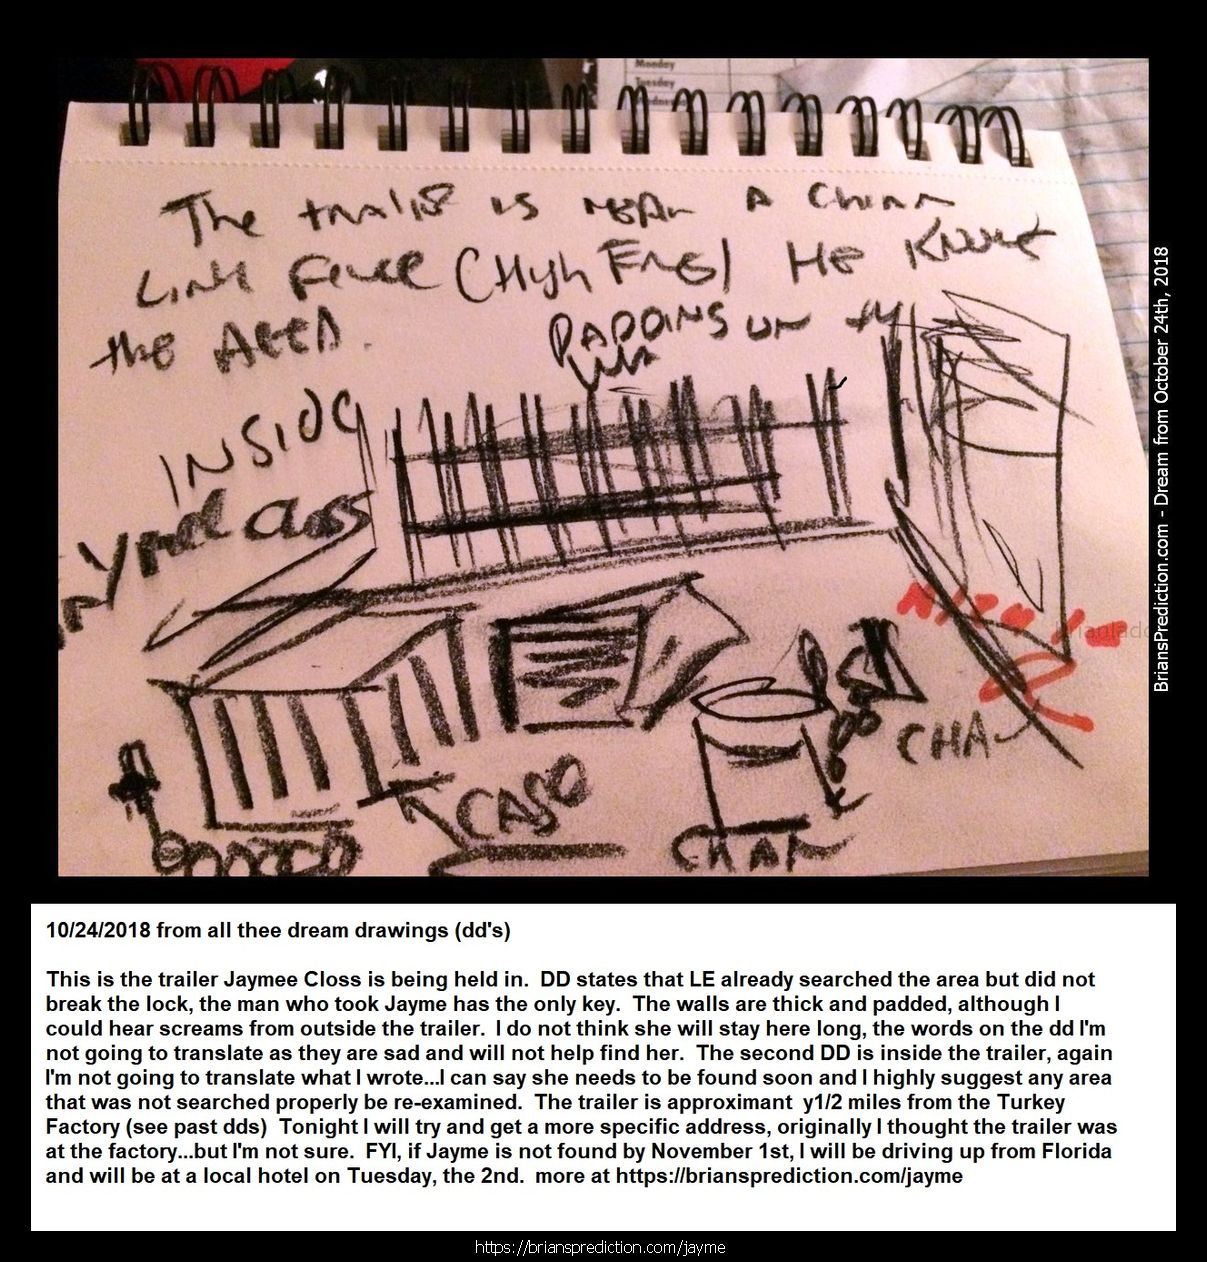 Jayme Closs Found Jayme Closs 11235 24 October 2018 2 - 1/12/2019 These Are The Dream Drawings Related To Missing Teen J...
1/12/2019 These Are The Dream Drawings Related To Missing Teen Jayme Lynn Closs The Murder Of  James Closs And Denise Closs (all From 2018)  I'M Aware Of Her Being Located On January 10th, 2019.  There Are Many Things That Do Seem To Make So Far And I Think There Is More To The Case Than Murder And Kidnapping And Lae May Be Missing Something Very Important And Involve Many More People  Will Post New Updates At   https://briansprediction.com/Jayme  Dream Text  Going To Kill Her, The Trailer Is At Cenex In Barron.  Jayme Closs, They Were In The House For 45 Minutes Before The Killings, Look Under The House Again.  Jaymee Closs Found, Go Back Look In The Crawlspace, The Phone She Used To Talk To Him Is There, Cars Unrelated, Motorcycle, Police Missed The Box?  Jayme Closs, Body Found 6 Miles From Home, January 12th, 2019, Lazy Eye, Returns To Home (this Is For January 2019 And Does Not Mean She Has Already Been Murdered)  Jaymee Closs Found, Look Again, Drove Right By The Trailer, Dallas (I Realize Dd Says Dallas, I Do Not Think This Trailer Is In Texas)  Jayme Closs Look Again, He'S Going To Kill Her On December 16th, Hania Aguila Killed December 25th, Numbers, Church, Trailer (may Not Be The Right Translation Of Last Nights Dream But I Will Be Posting Additional Dreams On These 2 Cases In A Few Day  Trailer, He Took Her Here, Hania Noelia Aguilar Found, Fire Tower, 27, More Numbers.  He'S Taking Another Girl, Trailer, December 2018  Mollie Tibbits Is Still Alive After Killing, Trailer, 27, 27, 57 Feet, Fire Tower, He Going To Take Another Girl - Always 2. I'M Aware She Is Not Alive And I'M Not Sure What This Means.  Hania Aguilar Case May Be Related To The Jayme Closs Case An Could Explain Why I'M Having So Much Difficulty Finding This Trailer.  Jayme Closs Is Still Alive In Trailer, Lacross Thee Dreams Are From November 11th - 13th 2018 And Are From My Hospital Room In Port Saint Lucie Florida. Please Visit My Site News For More Details On This Case At   https://briansprediction.com/News.Php  Jayme Closs, Police Are Withholding This Item, Someone Knows When She Had This, Drugs (meth) Are Being Shipped In And Out Of Turkey Plant In The Bird'S Cavities, Road Dogs Biker Gang.  Box In Truck, Colton Treu, Was In Rice Lake, Eau Claire, Refrigerated Trailer, Knows Where Jayme Closs Is?  The Man At Cameron? Who Will Go To James Closs'S Funeral Is The Same Man Who Has Jayme Closs  10/24/2018 From All Thee Dream Drawings (dd's) This Is The Trailer Jayme Closs Is Being Held In. Dd States That Le Already Searched The Area But Did Not Break The Lock, The Man Who Took Jayme Has The Only Key.  2018 2 Psychic Prediction.Jpg  Connersville, Numbers, Jayme Cross (this Is Important)  Jayme, Look Again, She Missed It (Jayme Cross Search Area Related)  October 23rd, 2018 Jaymee Closs News Report? Links To Auto Garage And Moms Boyfriend, Rice Lake.  This Is The Same Trailer Related To The Jayme Cross Case.  124 Files On 2 Page(S)  Engle Creek Springs, Jayme (maybe Related To Jayme Cross Missing Teen Case, This Is A Real Location Map Included)  Dark Blue Car, I'M In The Back Seat And This Is What I Can See, There Are Crosses Handing Inside The Car And On The Floor (this Is A Lucid Dream Form 10/19 Or 10/20 Of 2018)  Engle Creek Springs, Jayme (maybe Related To Jayme Cross Missing Teen Case, This Is A Real Location Map Included)  Missing Teen Jayme Closs I Believe Will Be Located Shortly, I Will Post What I Can At   https://briansprediction.com/Jayme Expect Some Sort Of Update By Le On October 23rd And Much More To Follow!  Jayme Closs And The Deaths Of James Closs And Denise Closs 11185 16 October 2018 1 Psychic Prediction  Mithe Cartel Did Not Do This, Grain Silo (this May Or May Not Be Related To A Missing Person Case Jayme Closs)  Auto Garage And Flags Metal Rebar, Jayme Closs Would Walk Her To See Him, Go Back, Numbers.  Aka? Dawn Gordon Jayme Closs, Id, Renee Is A Hero, Rx (no Clue How This Is Related To Jayme Closs Missing Girl Case Unless Its Another Jayme, Awful Dream Though)  Road Block ??? Wisteria Lane South West In Adamsville, Missing Girl Jayme Closs With Steven K.  Jayme Closs, Wrong Information, She Had More Than One Fight With Her Parents, Look In Her Room Again (whatever Was Found In Her Room By Le Has More To It And Will Provide A More Accurate Location Than What They Are Going By Right Now)  Eau Claire, Jayme Closs Deerfield Road?  Missing Jayme Closs And The Deaths Of James Closs And Denise Closs.Jpg  Jayme Closs Search Map  Dna Of Steven Procopio Fount At Home Of James And Denise Closs In The Bathroom.  Jayme Closs And The Deaths Of James Closs And Denise Closs 11185 16 October 2018 1 Psychic Prediction.Jpg  These 2 Dd'S (dream Drawings) From 10-16-2018 Are Related To A Missing Girl Named Jayme Cross, I Have Opened A Case File Located At   https://briansprediction.com/Jayme  Jayme Closs And The Deaths Of James Closs And Denise Closs 11186 16 October 2018 2 Psy
